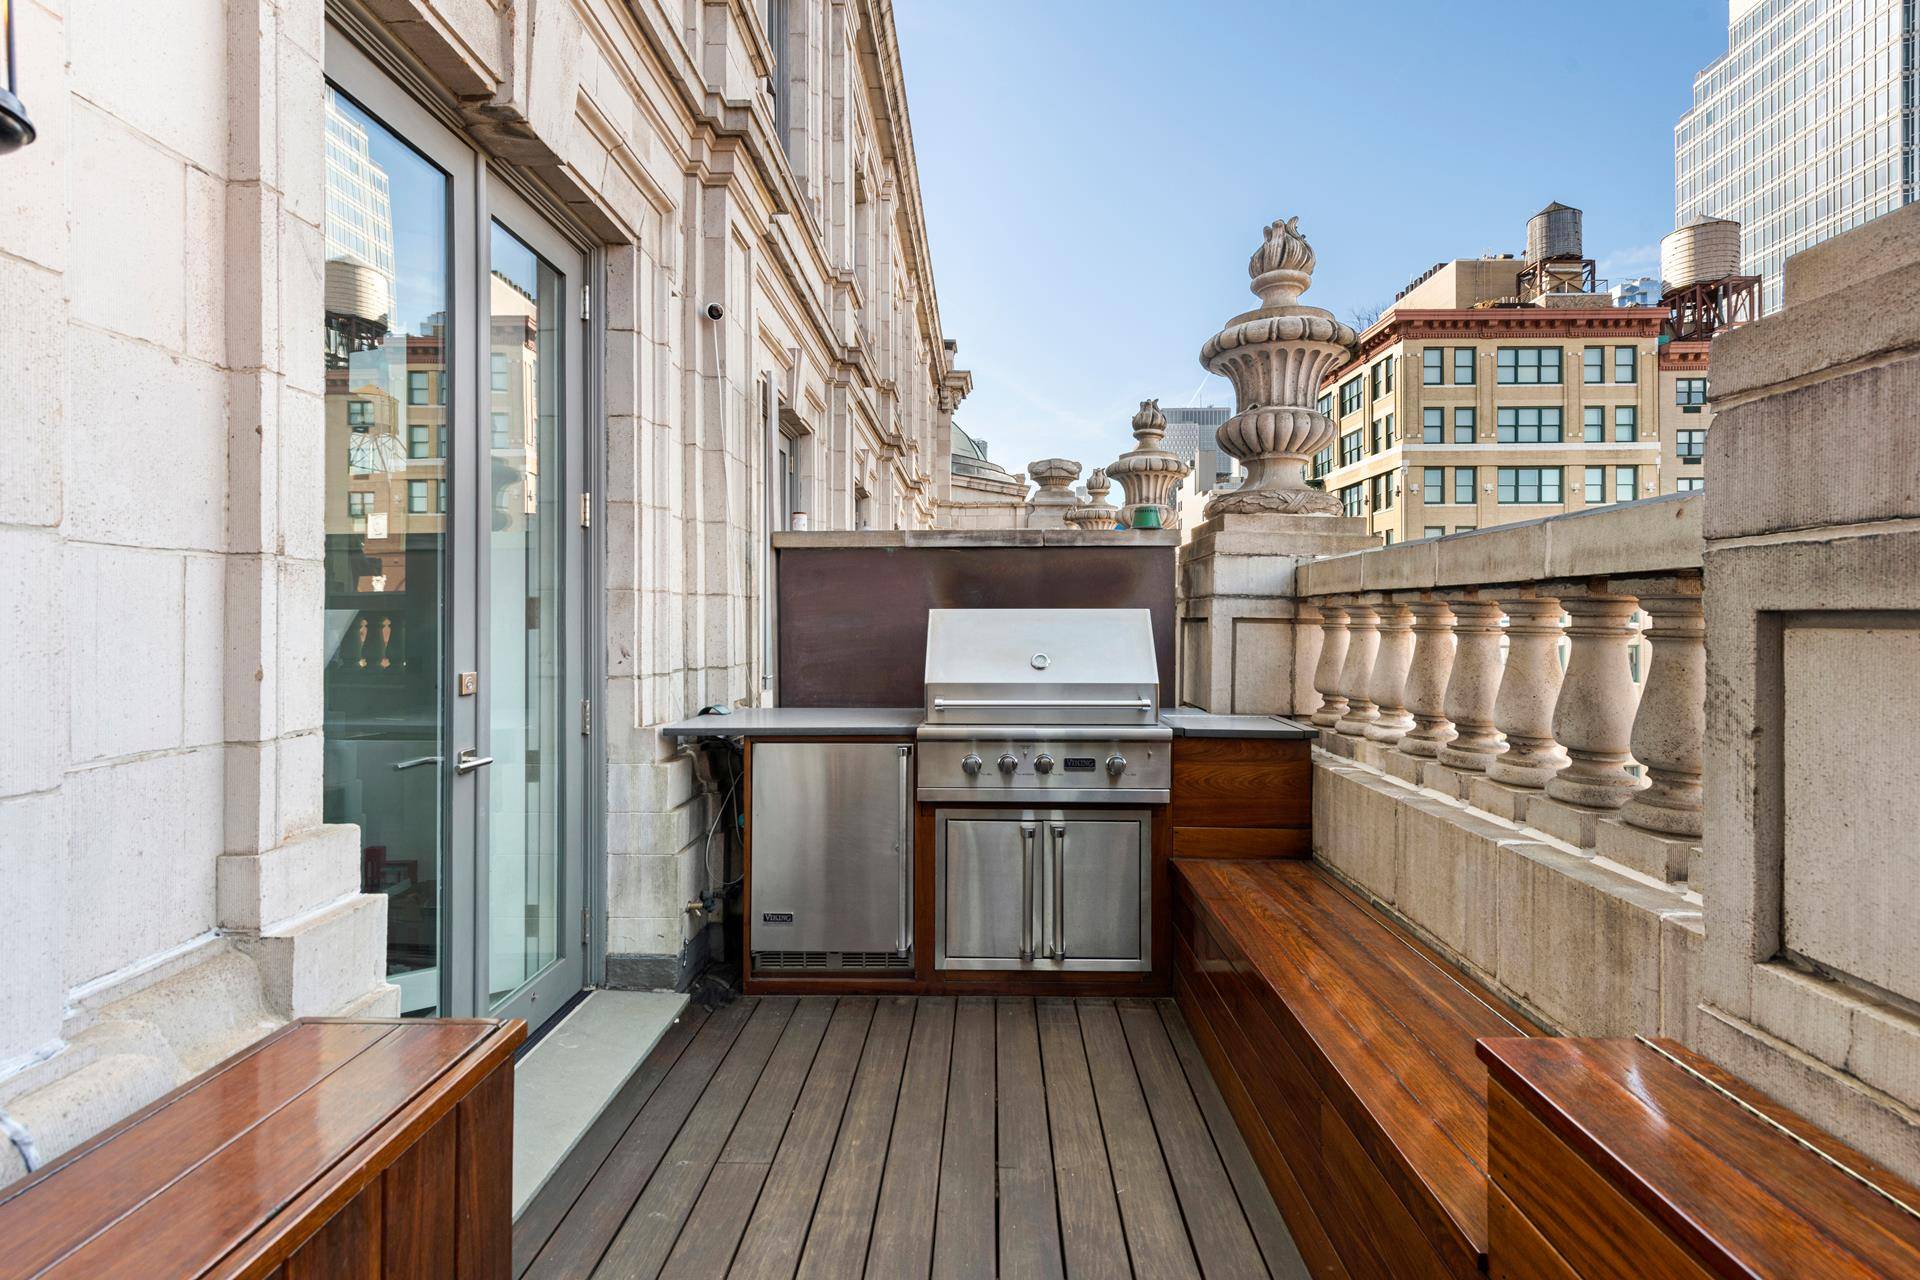 DECADENT HOME IN SOHO 3 BEDS 2 BATH EXQUISITE ARCHITECTURE SOARING CEILINGS DRAMATIC ROTUNDABALUSTRADE TERRACE WITH OUTDOOR KITCHEN PRIMARY BEDROOM WITH SKYLIGHTOPEN CHEF'S KITCHEN WITH PREMIUM APPLIANCES SPA BATHROOM CHIC ...